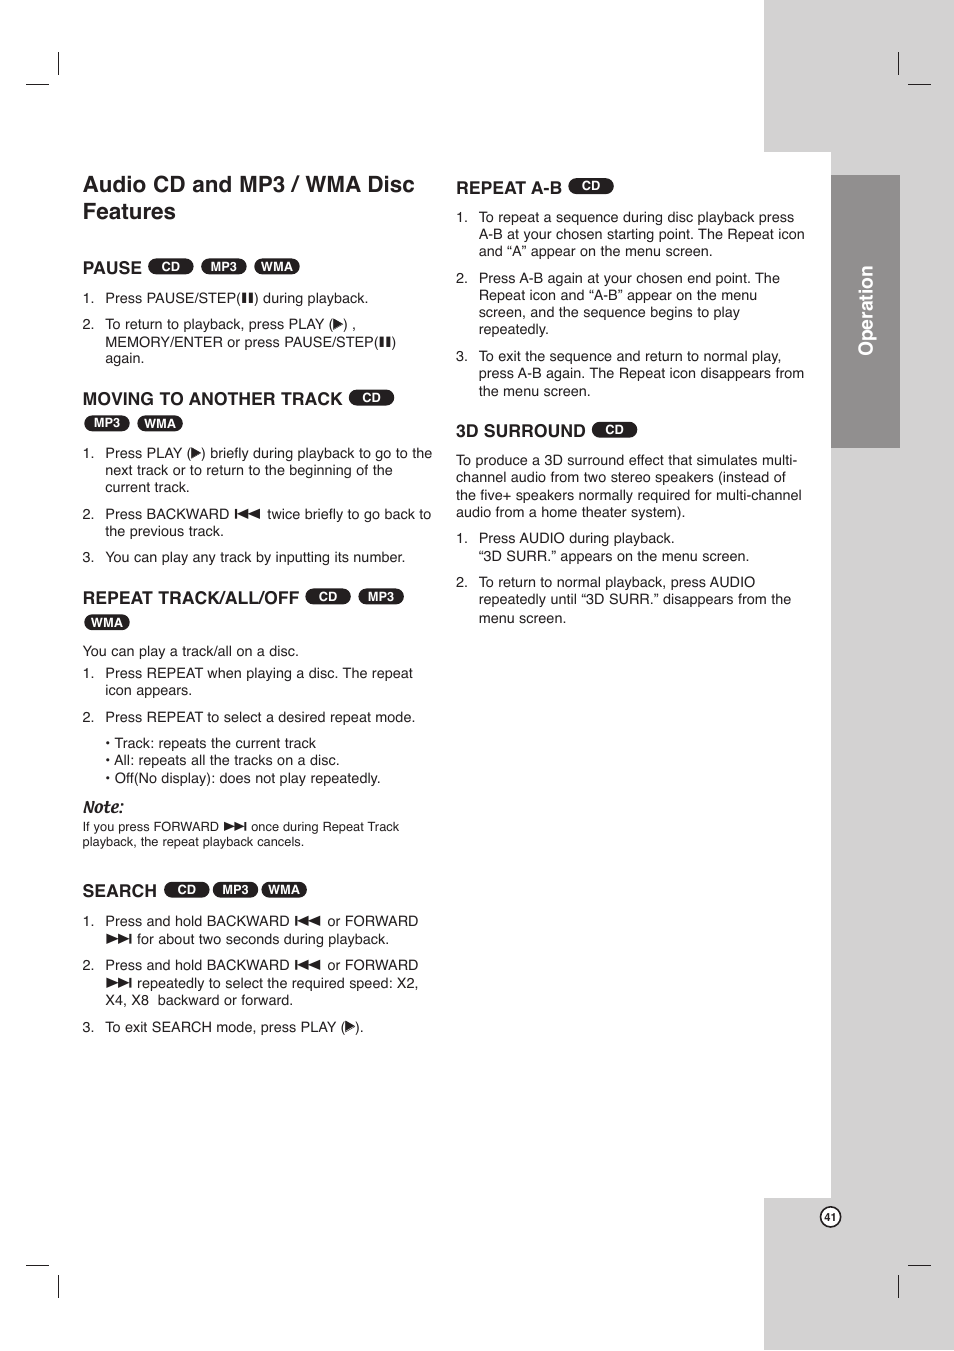 Audio cd and mp3 / wma disc features, Operation | LG LHX-557 User Manual | Page 41 / 56